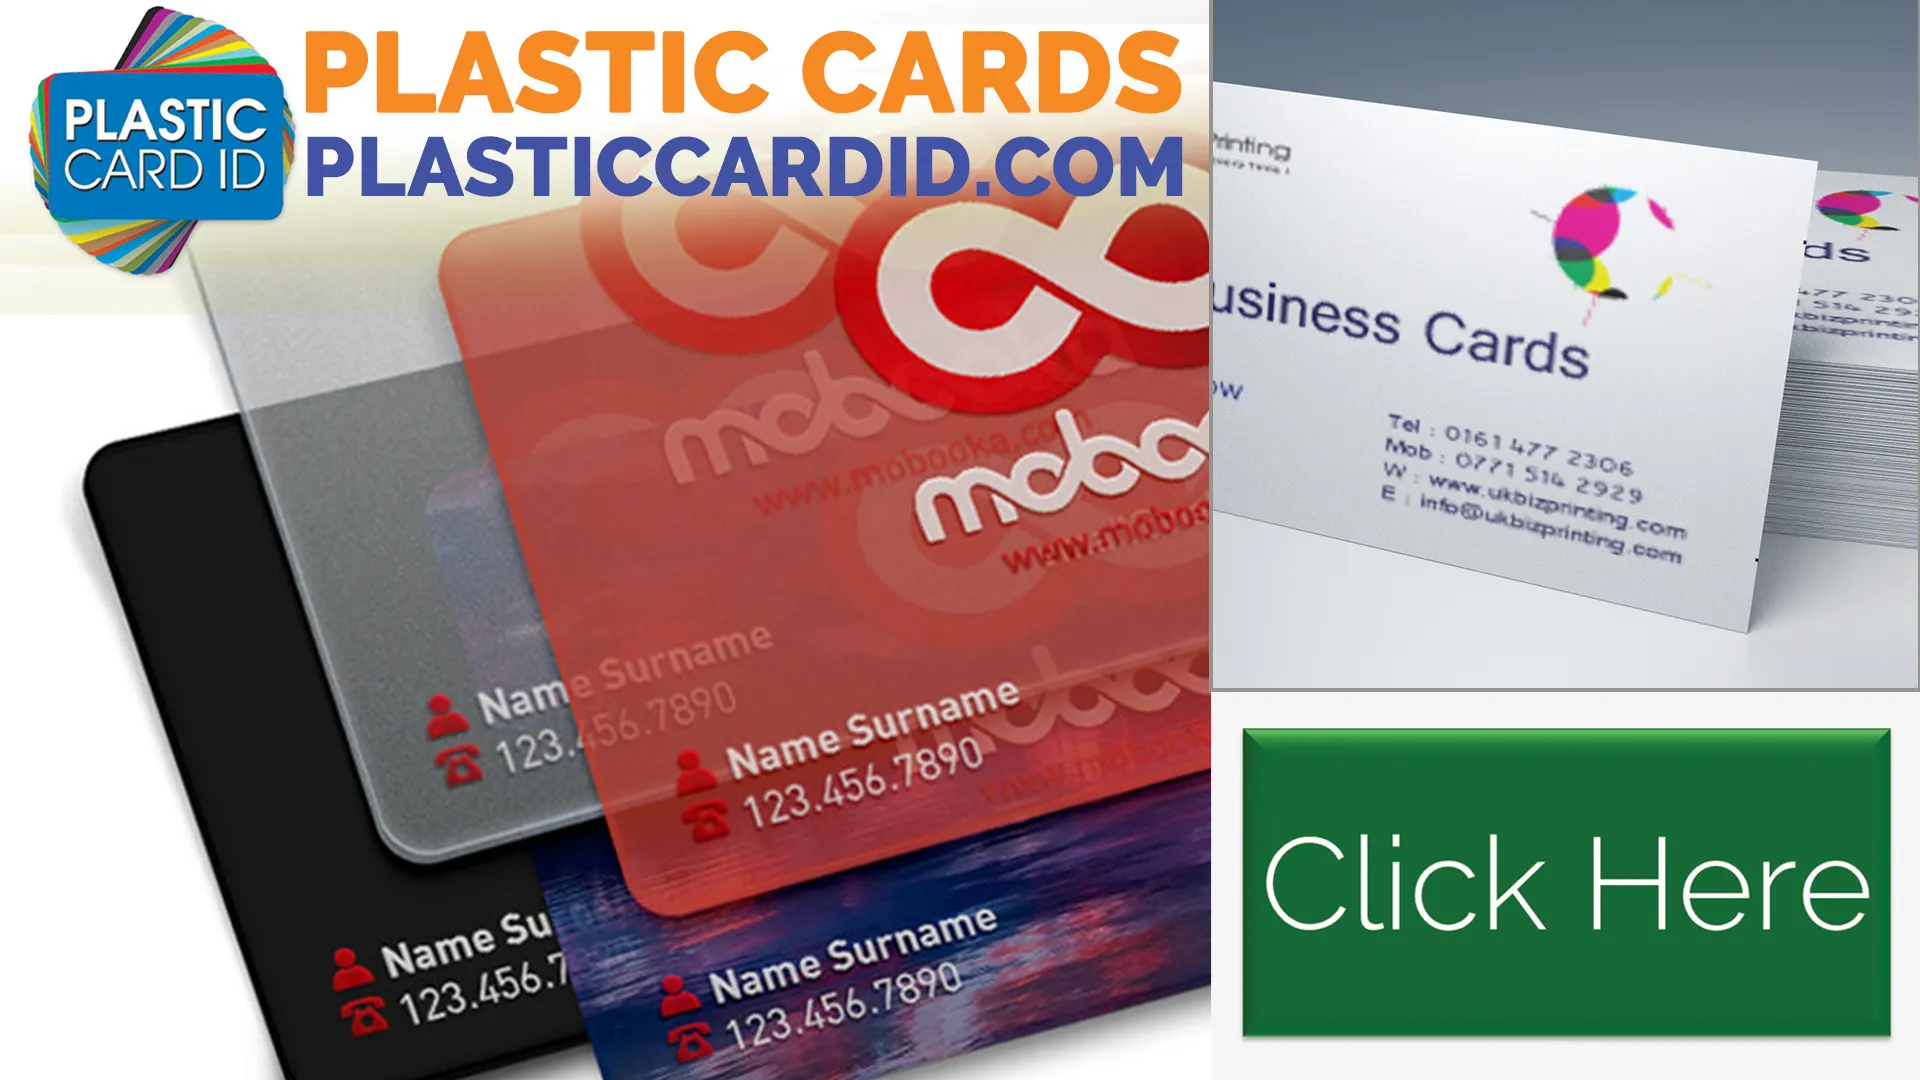 Personalize Your Plastic Cards with Ease